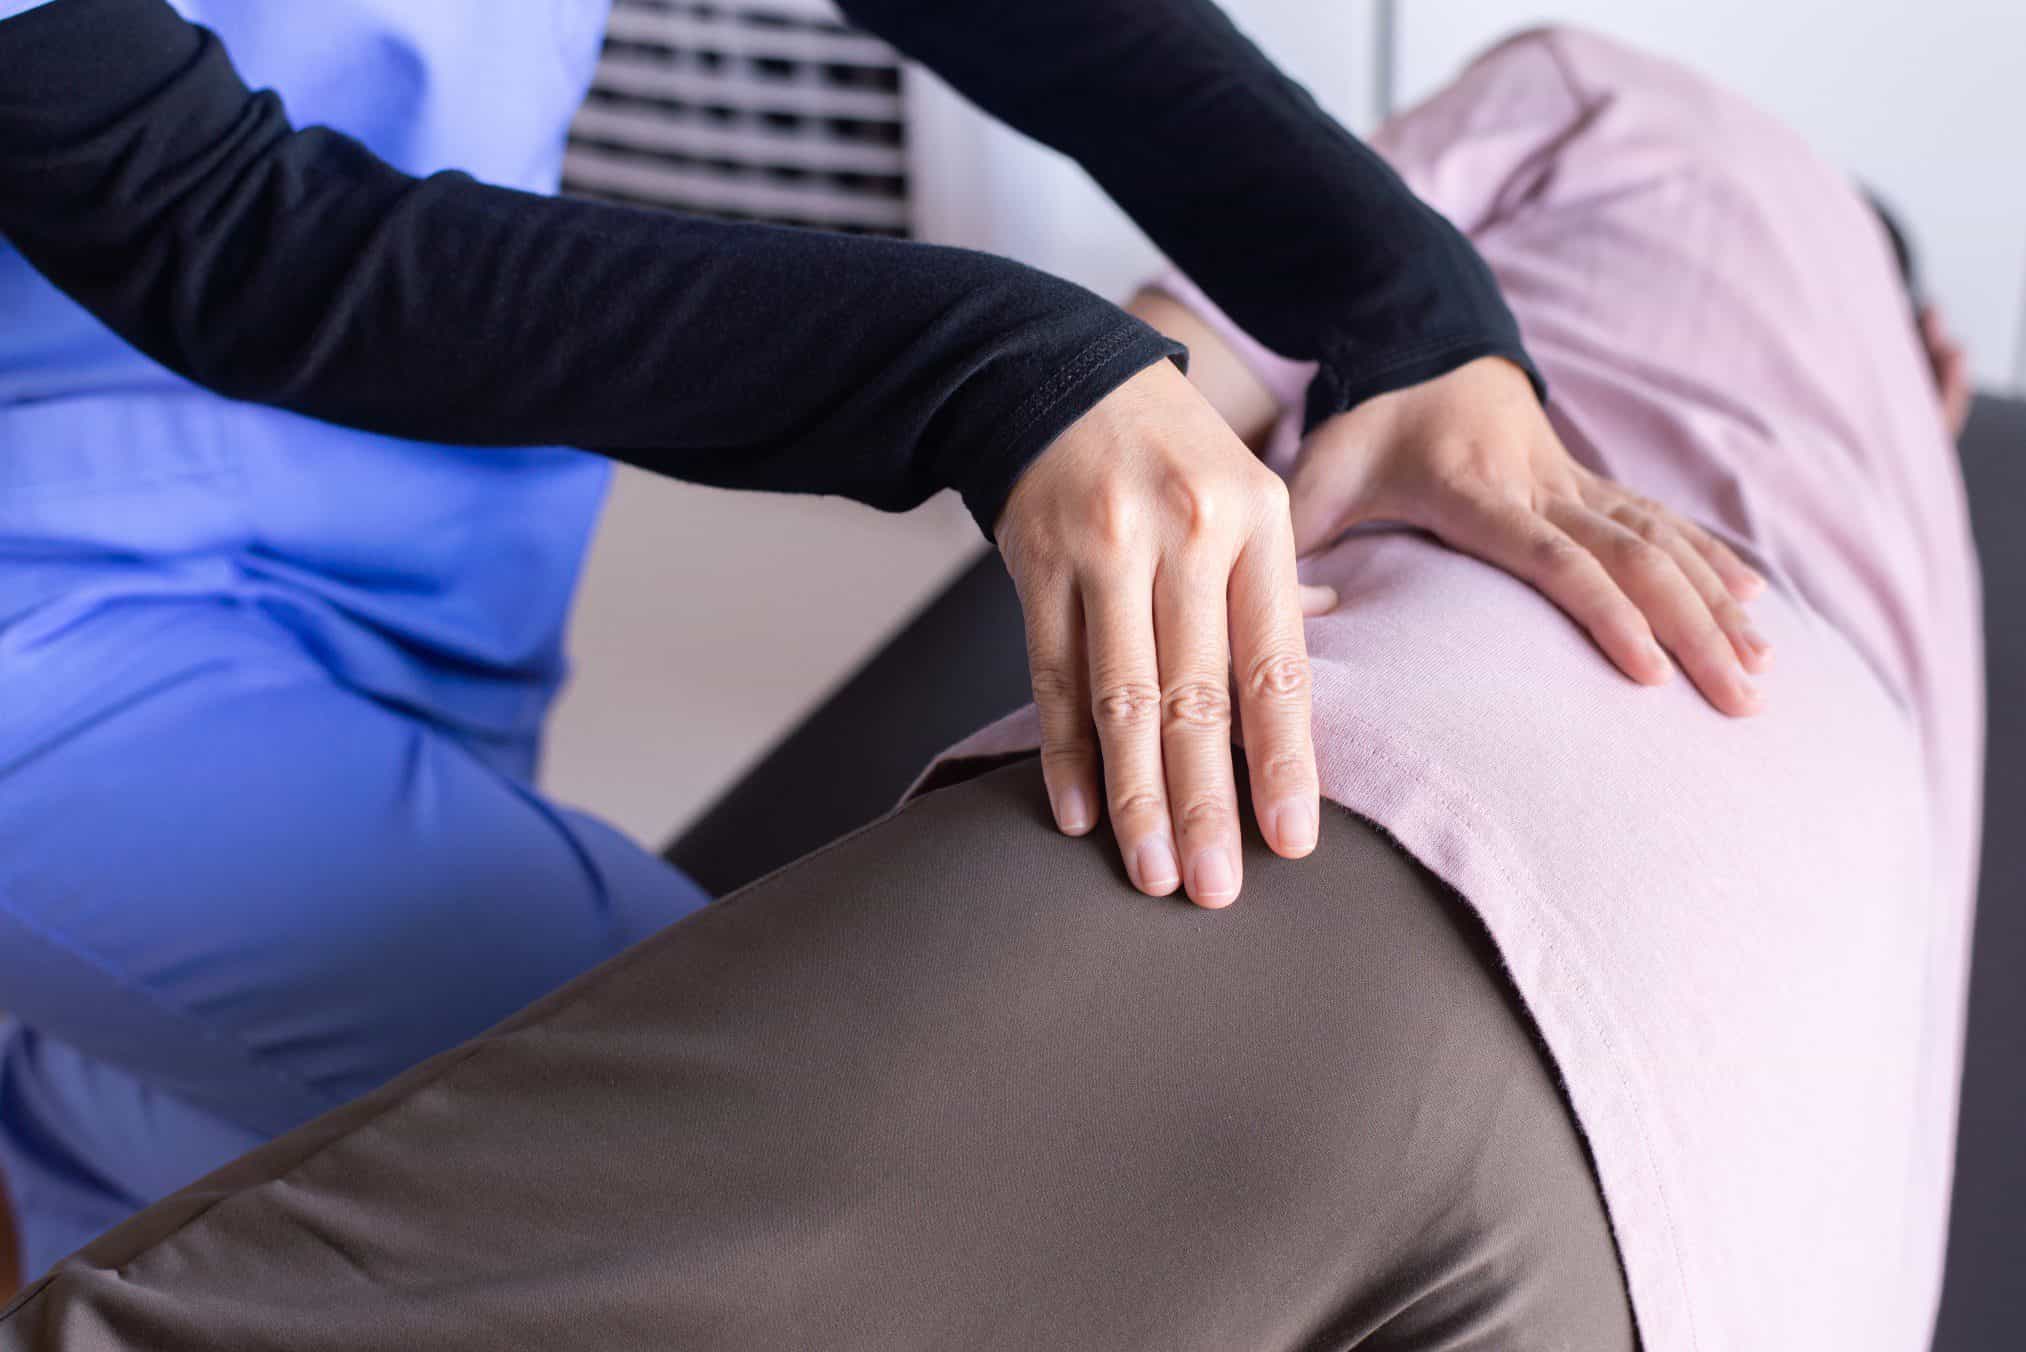 massage-muscle-hip-physiotherapy-therapist-elderly-woman-physical-therapy-lumbar-spine_t20_xGyZV9